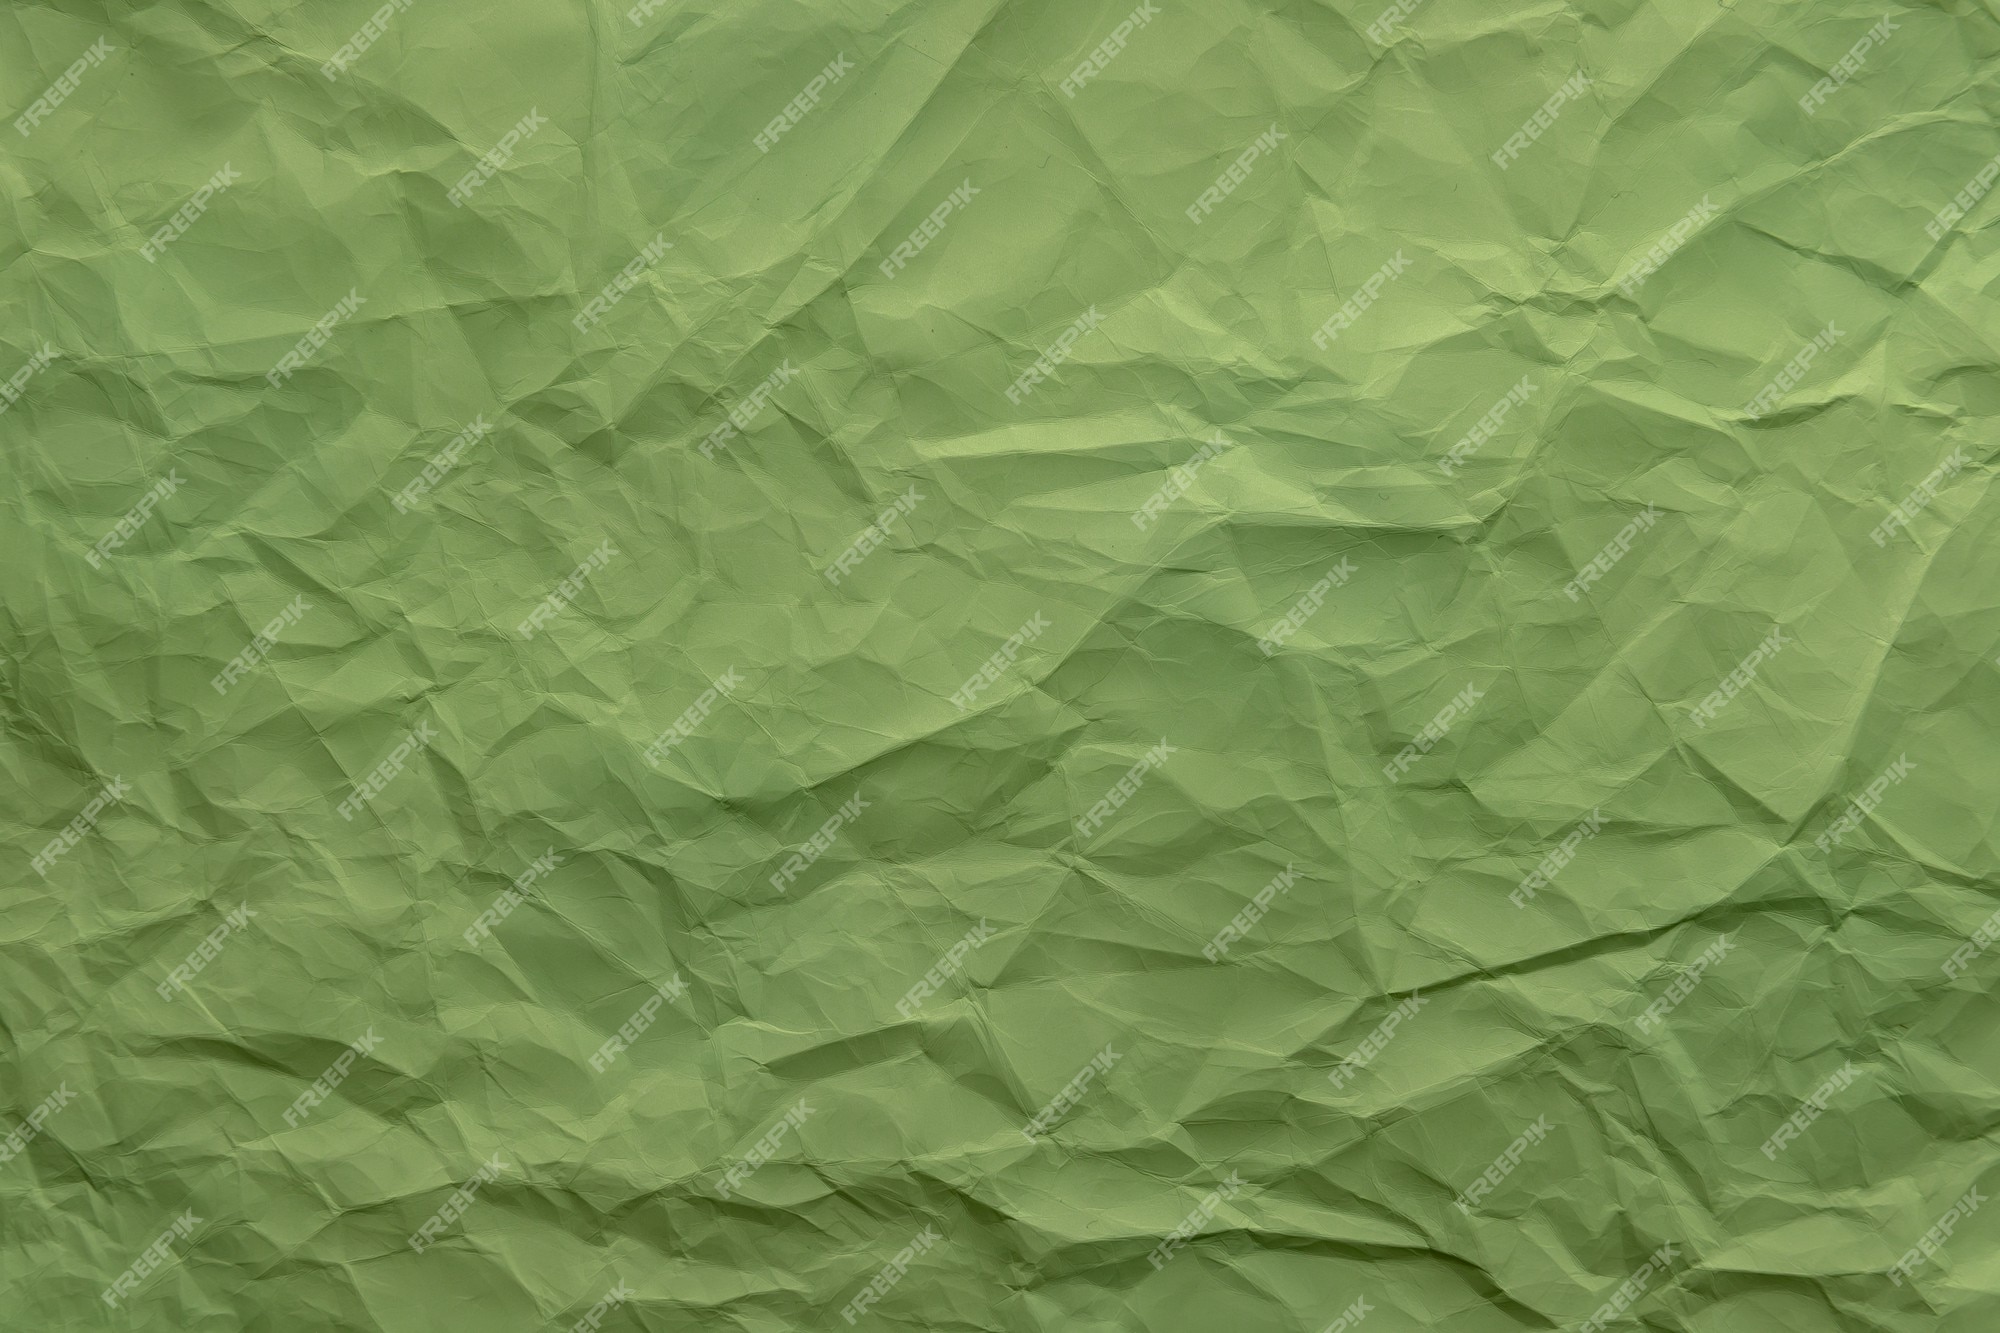 Premium Photo | Crumpled paper. sheet of green paper. detailed high  resolution texture. abstract background for wallpaper.